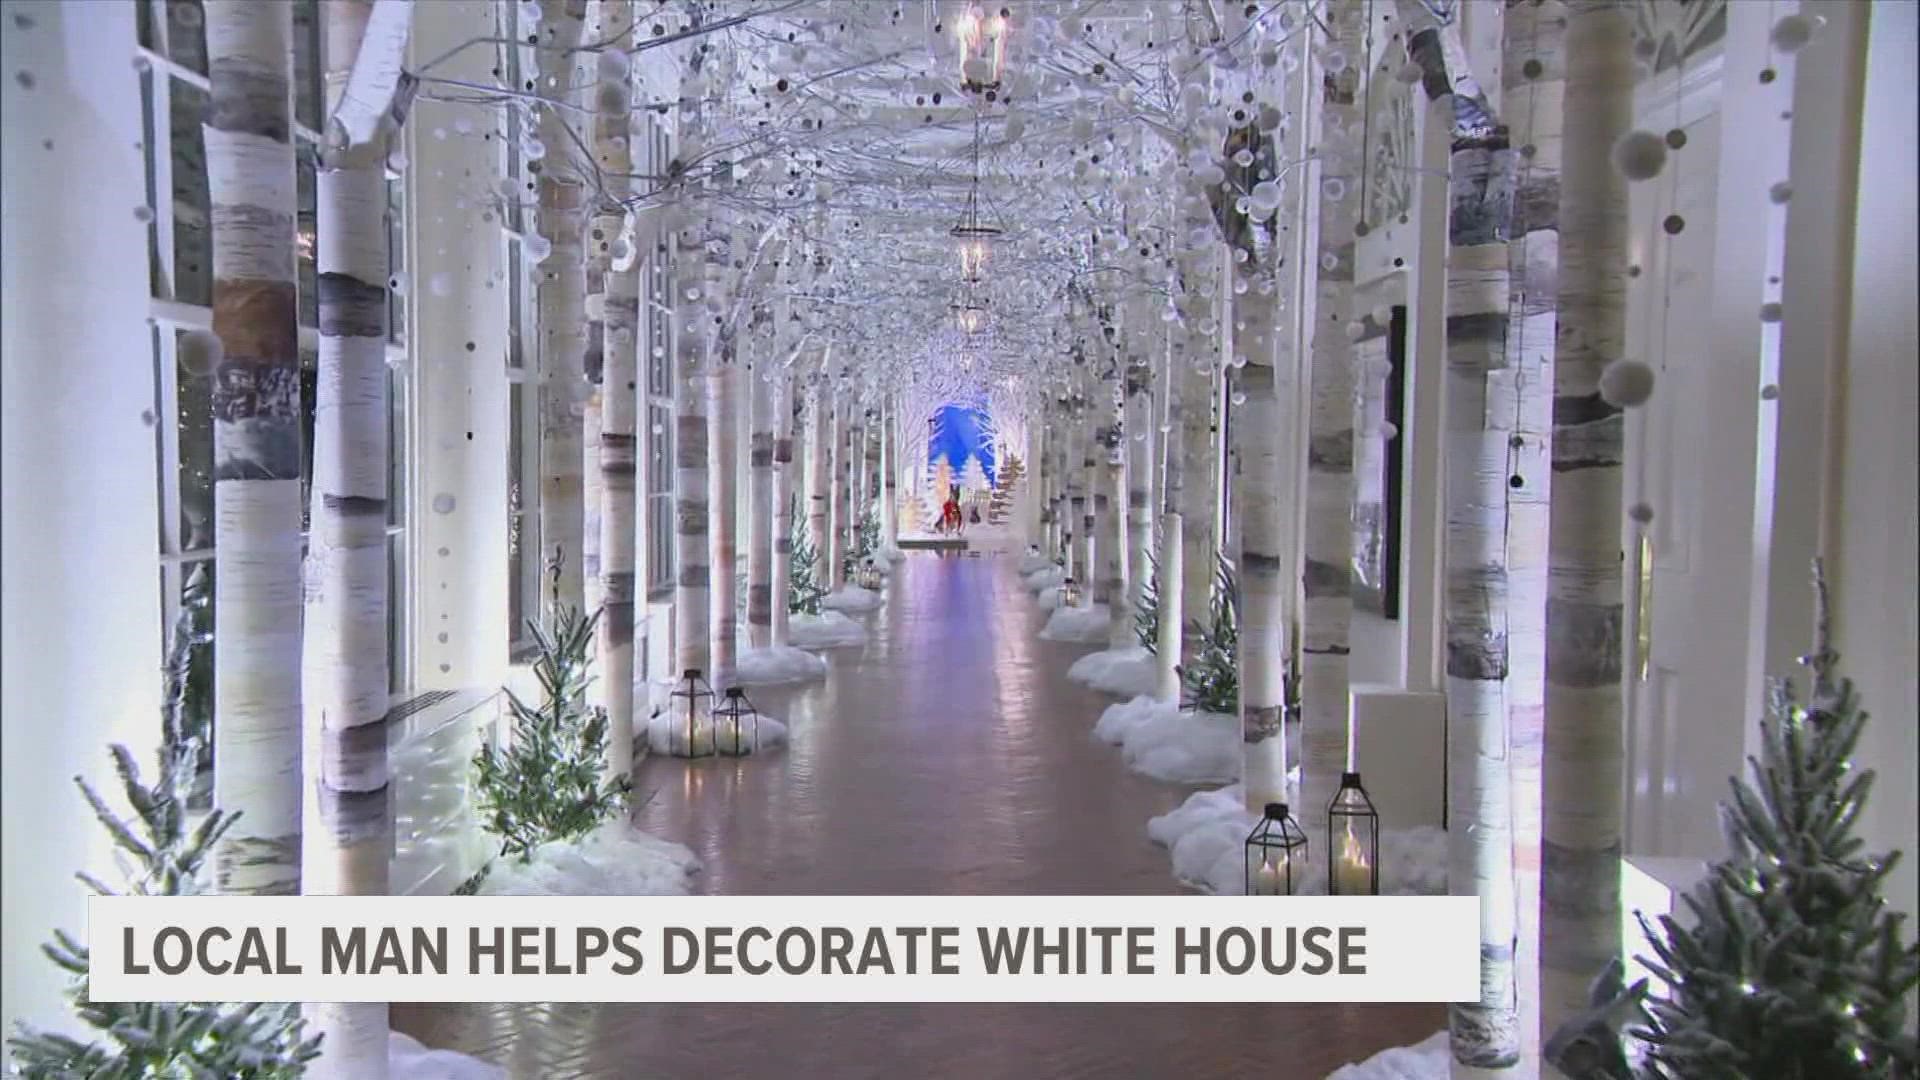 Norton Shores resident Rick Murack was part of a massive team that helped deck the halls at the White House this year.